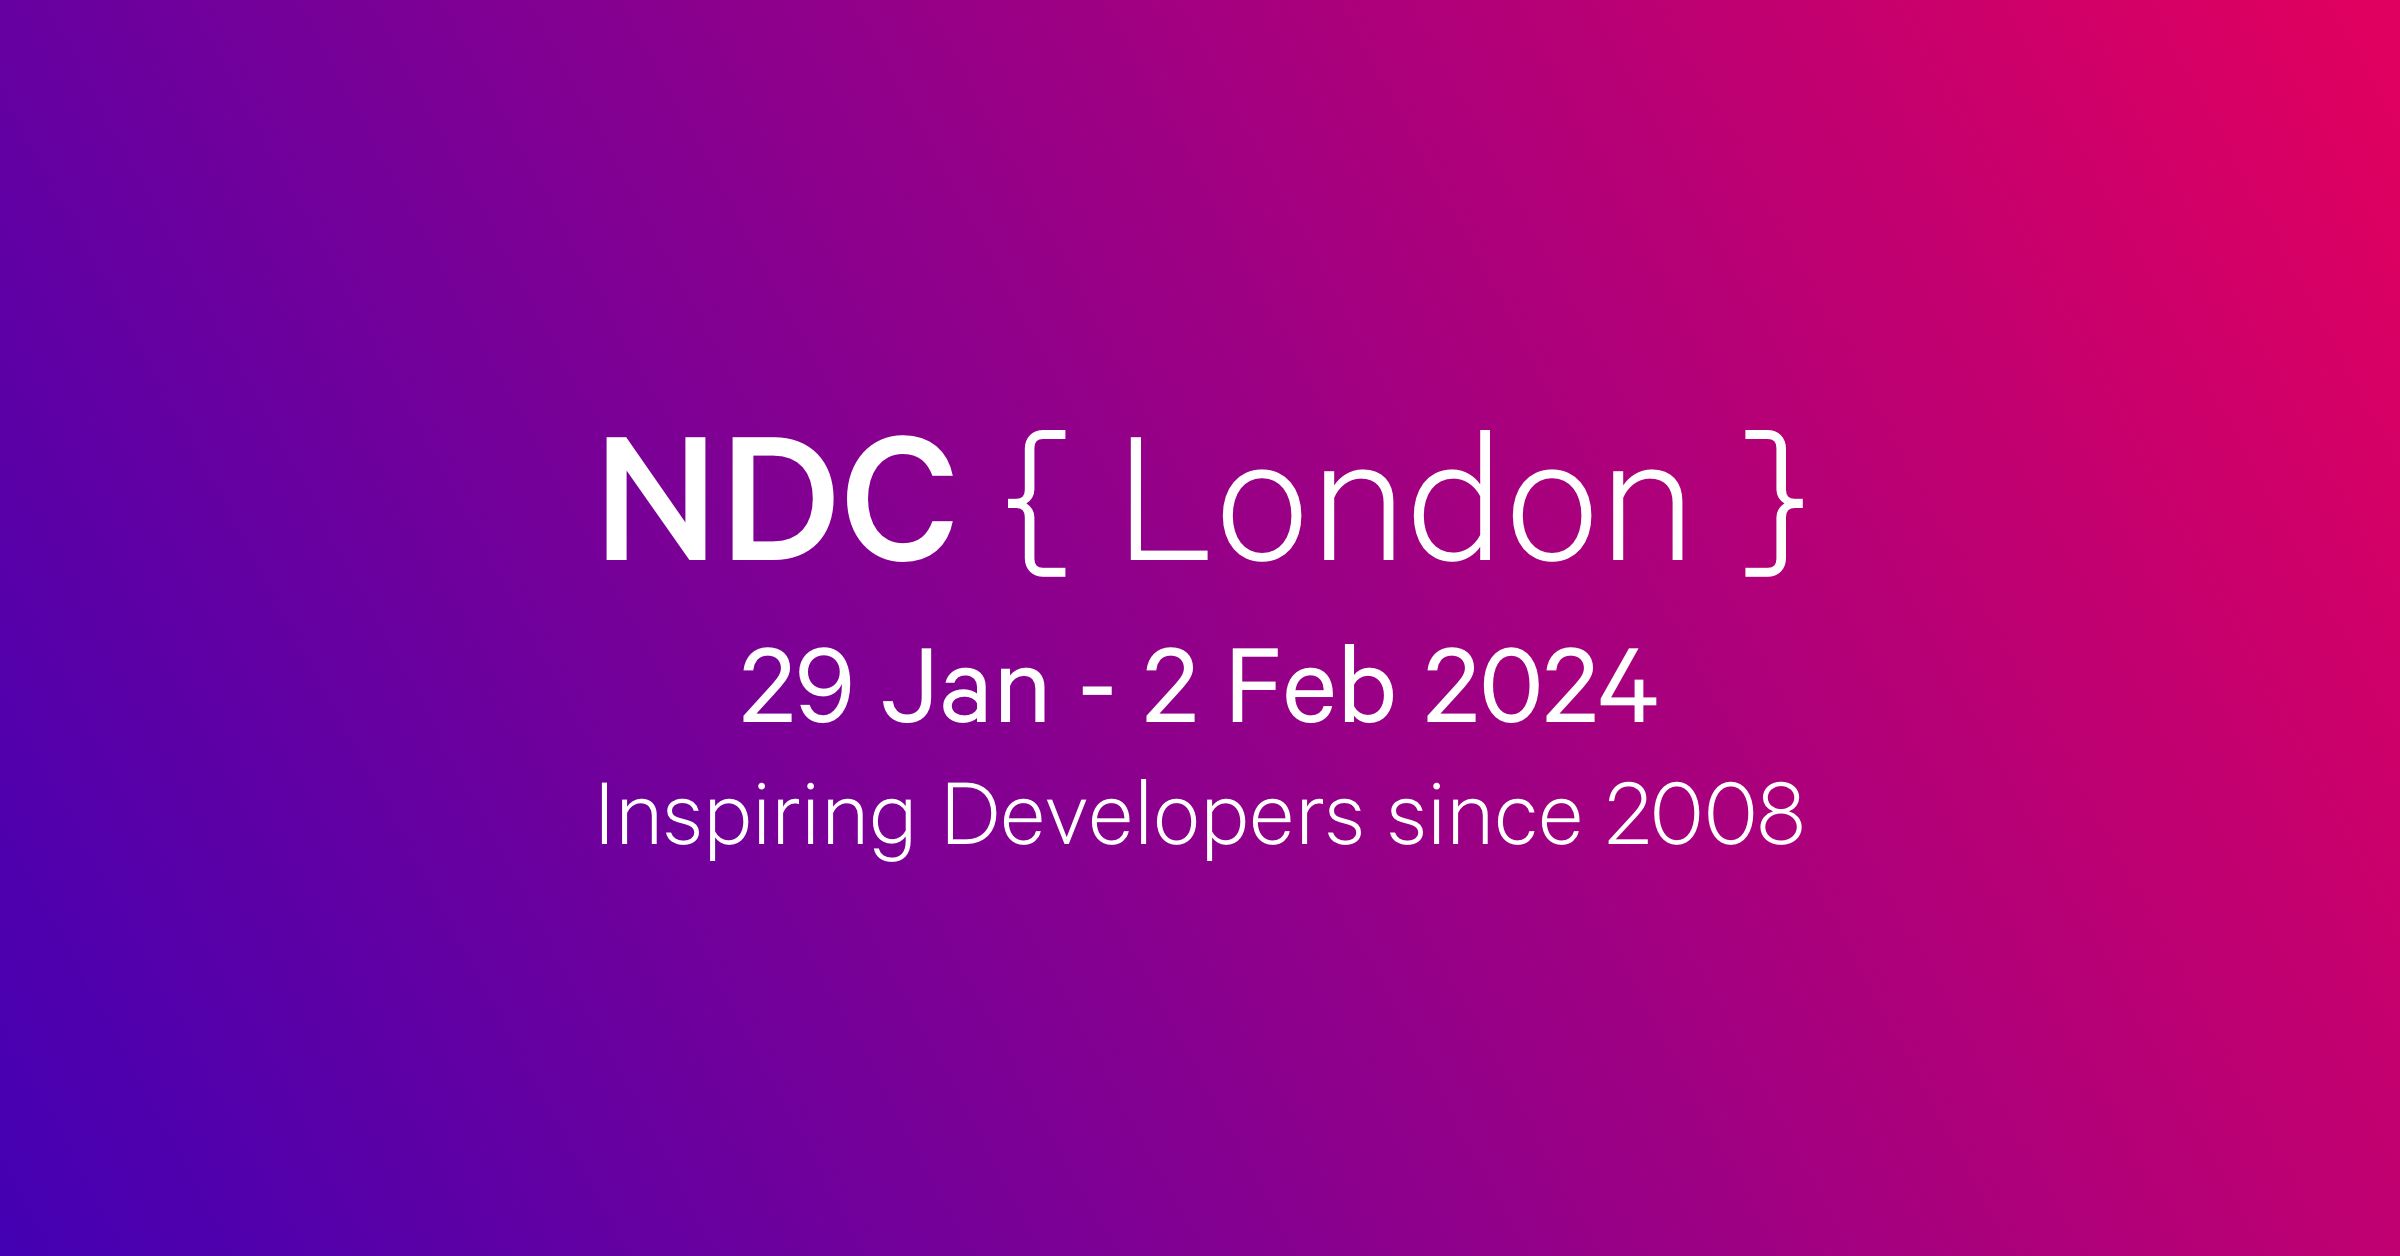 NDC London 2024 Conference for Software Developers